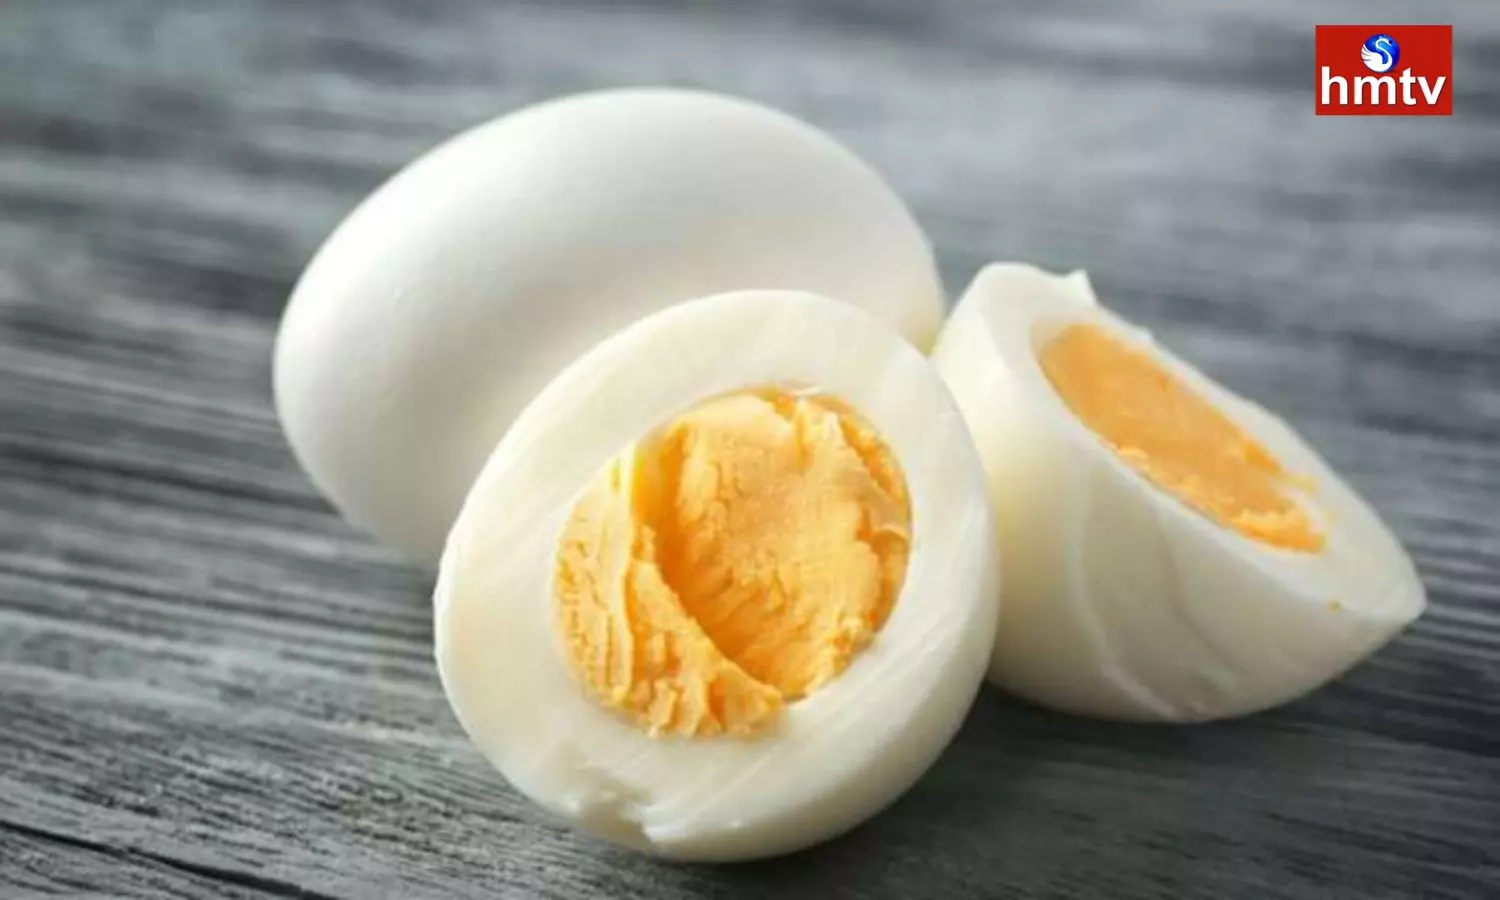 How Many Eggs Should be Eaten Per Day Lets Find Out What the Experts Say